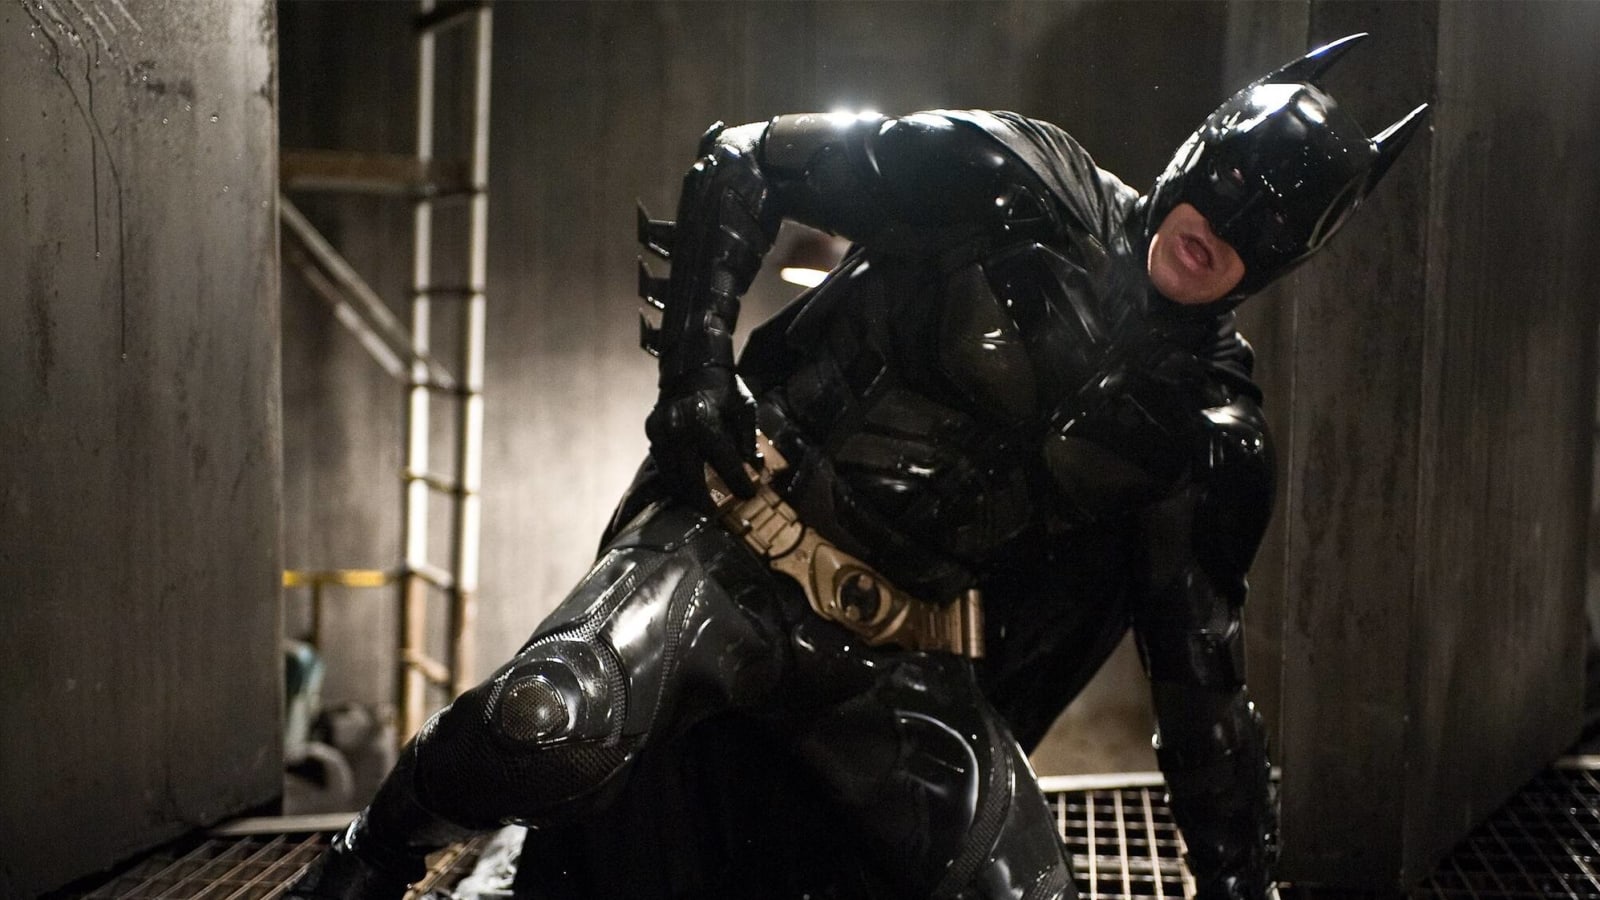 20 facts you might not know about 'The Dark Knight Rises' | Yardbarker